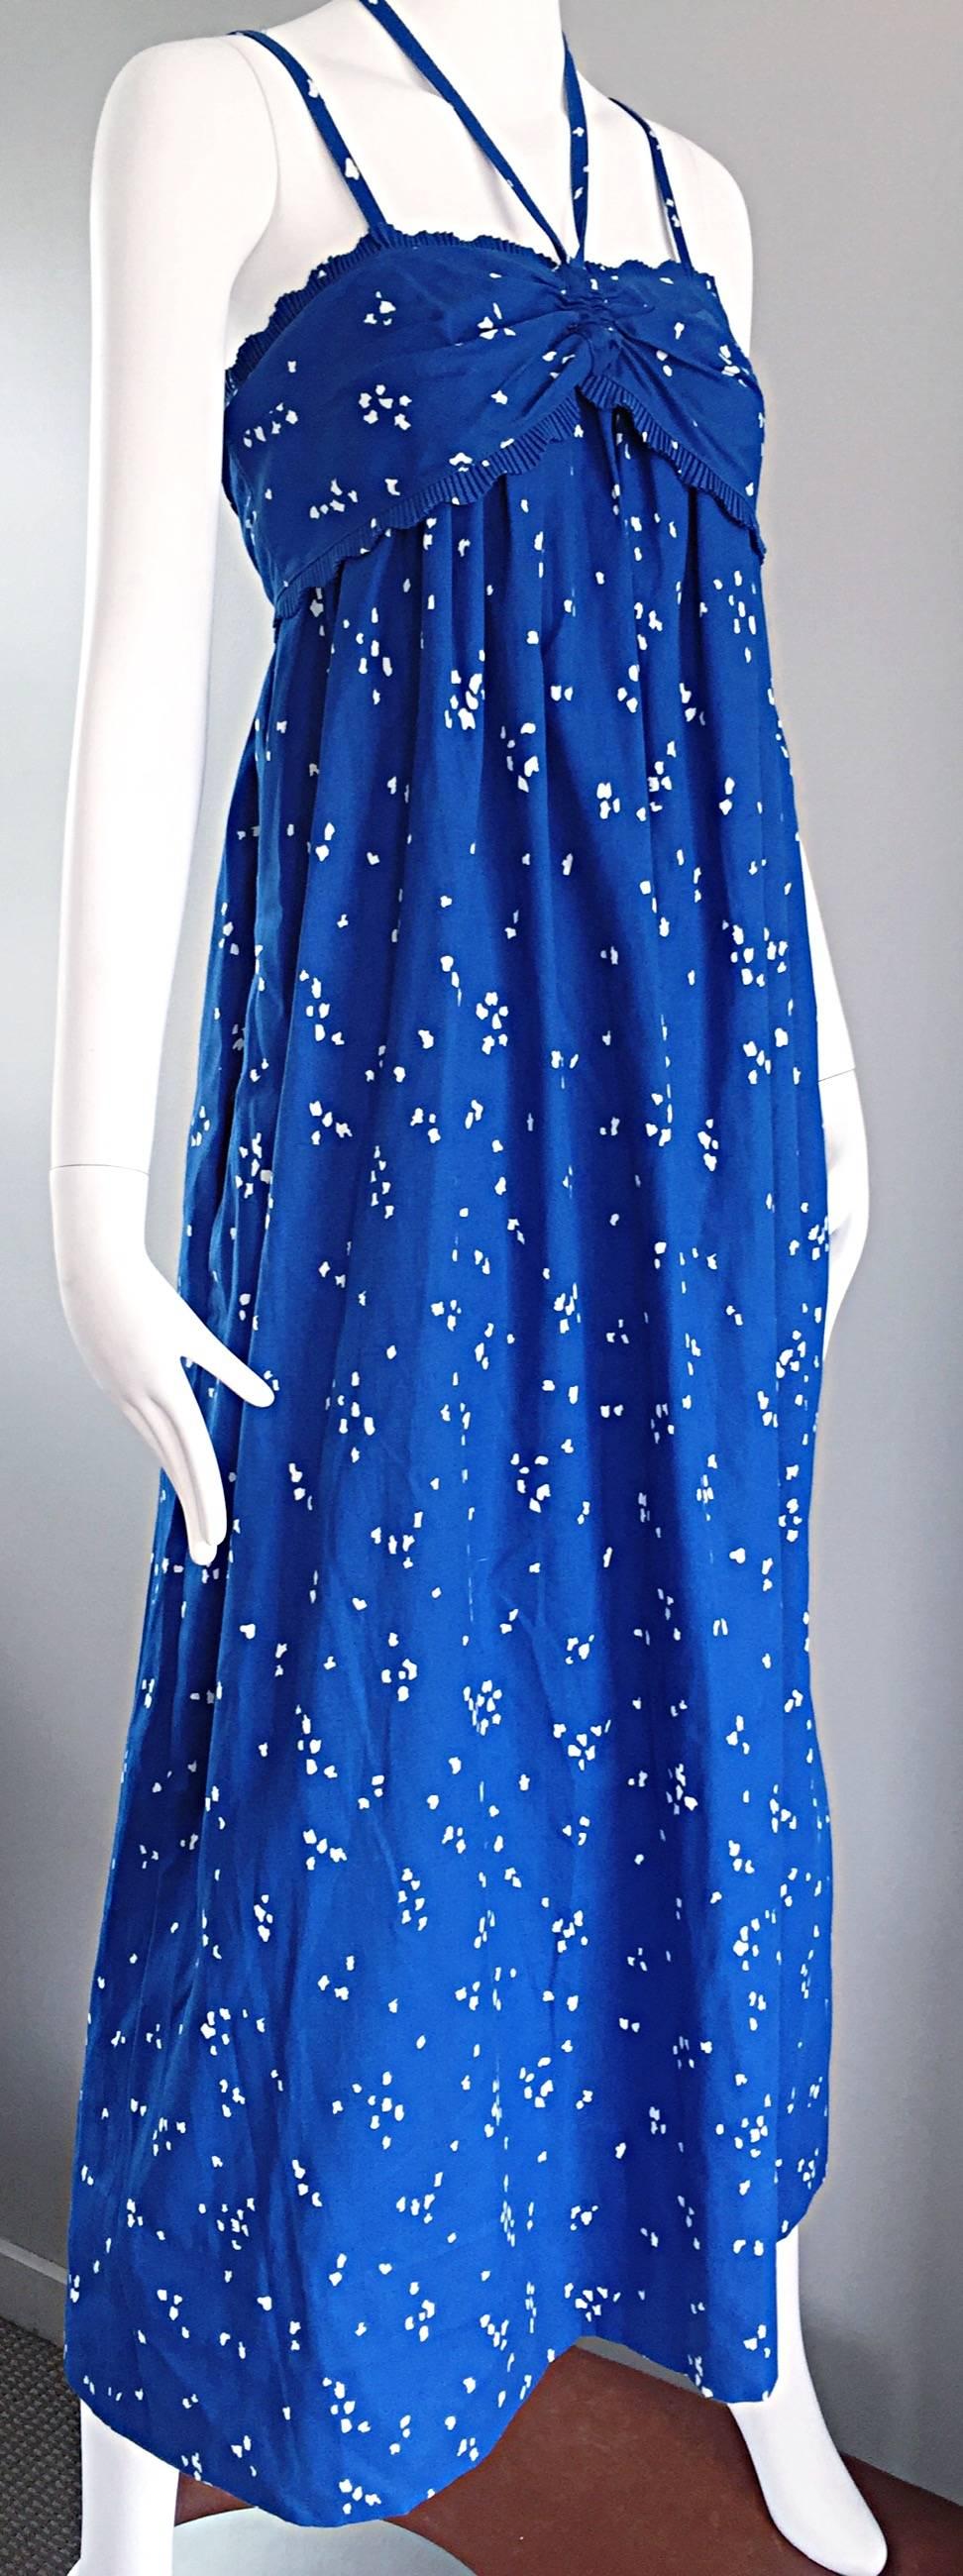 Bill Tice For I Magnin 1970s Hand Painted Blue + White 70s Halter Maxi Dress  3